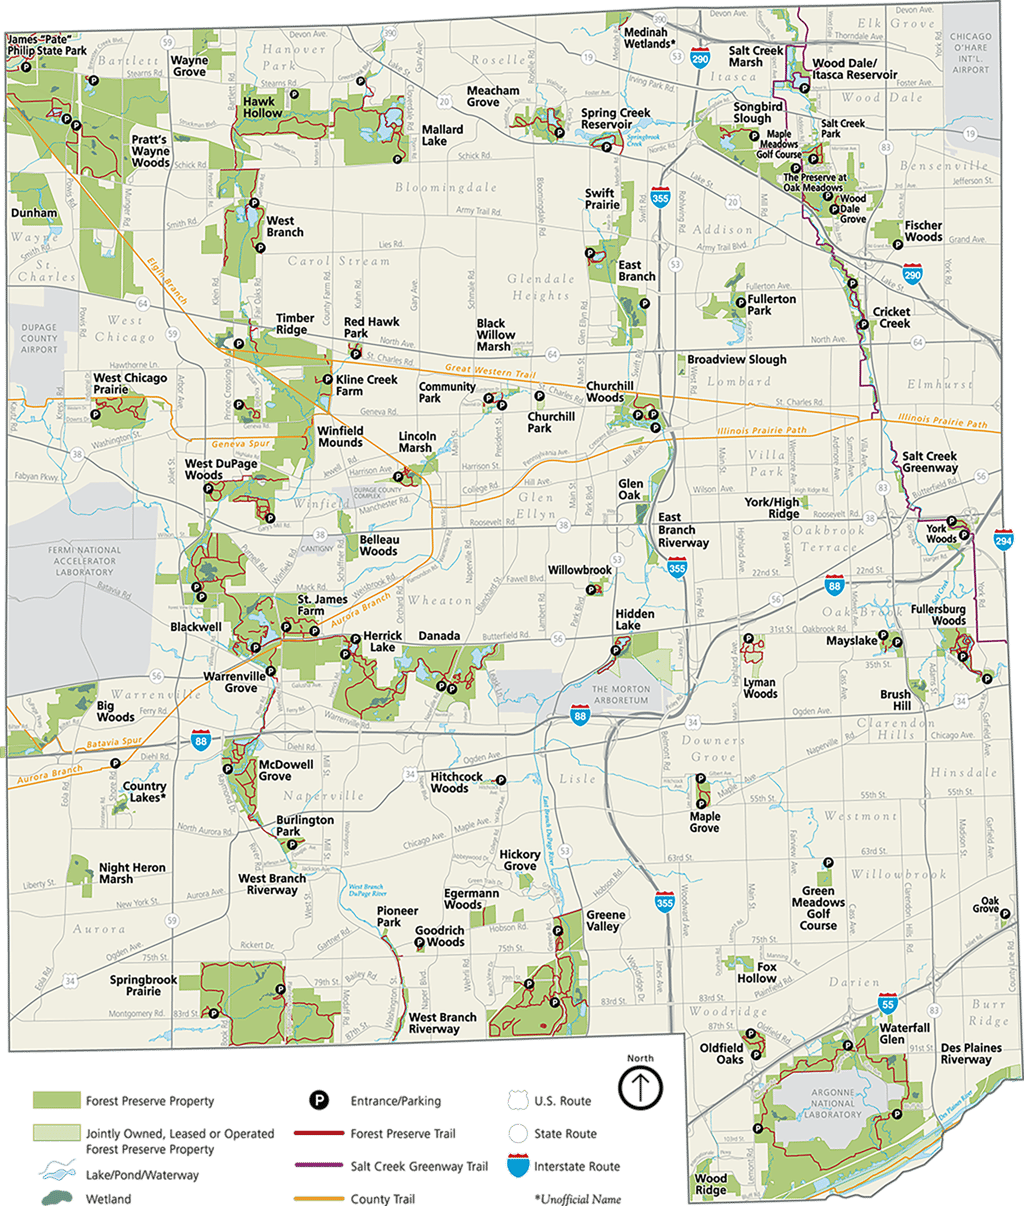 dupage-forest-preserves-map-2017.png